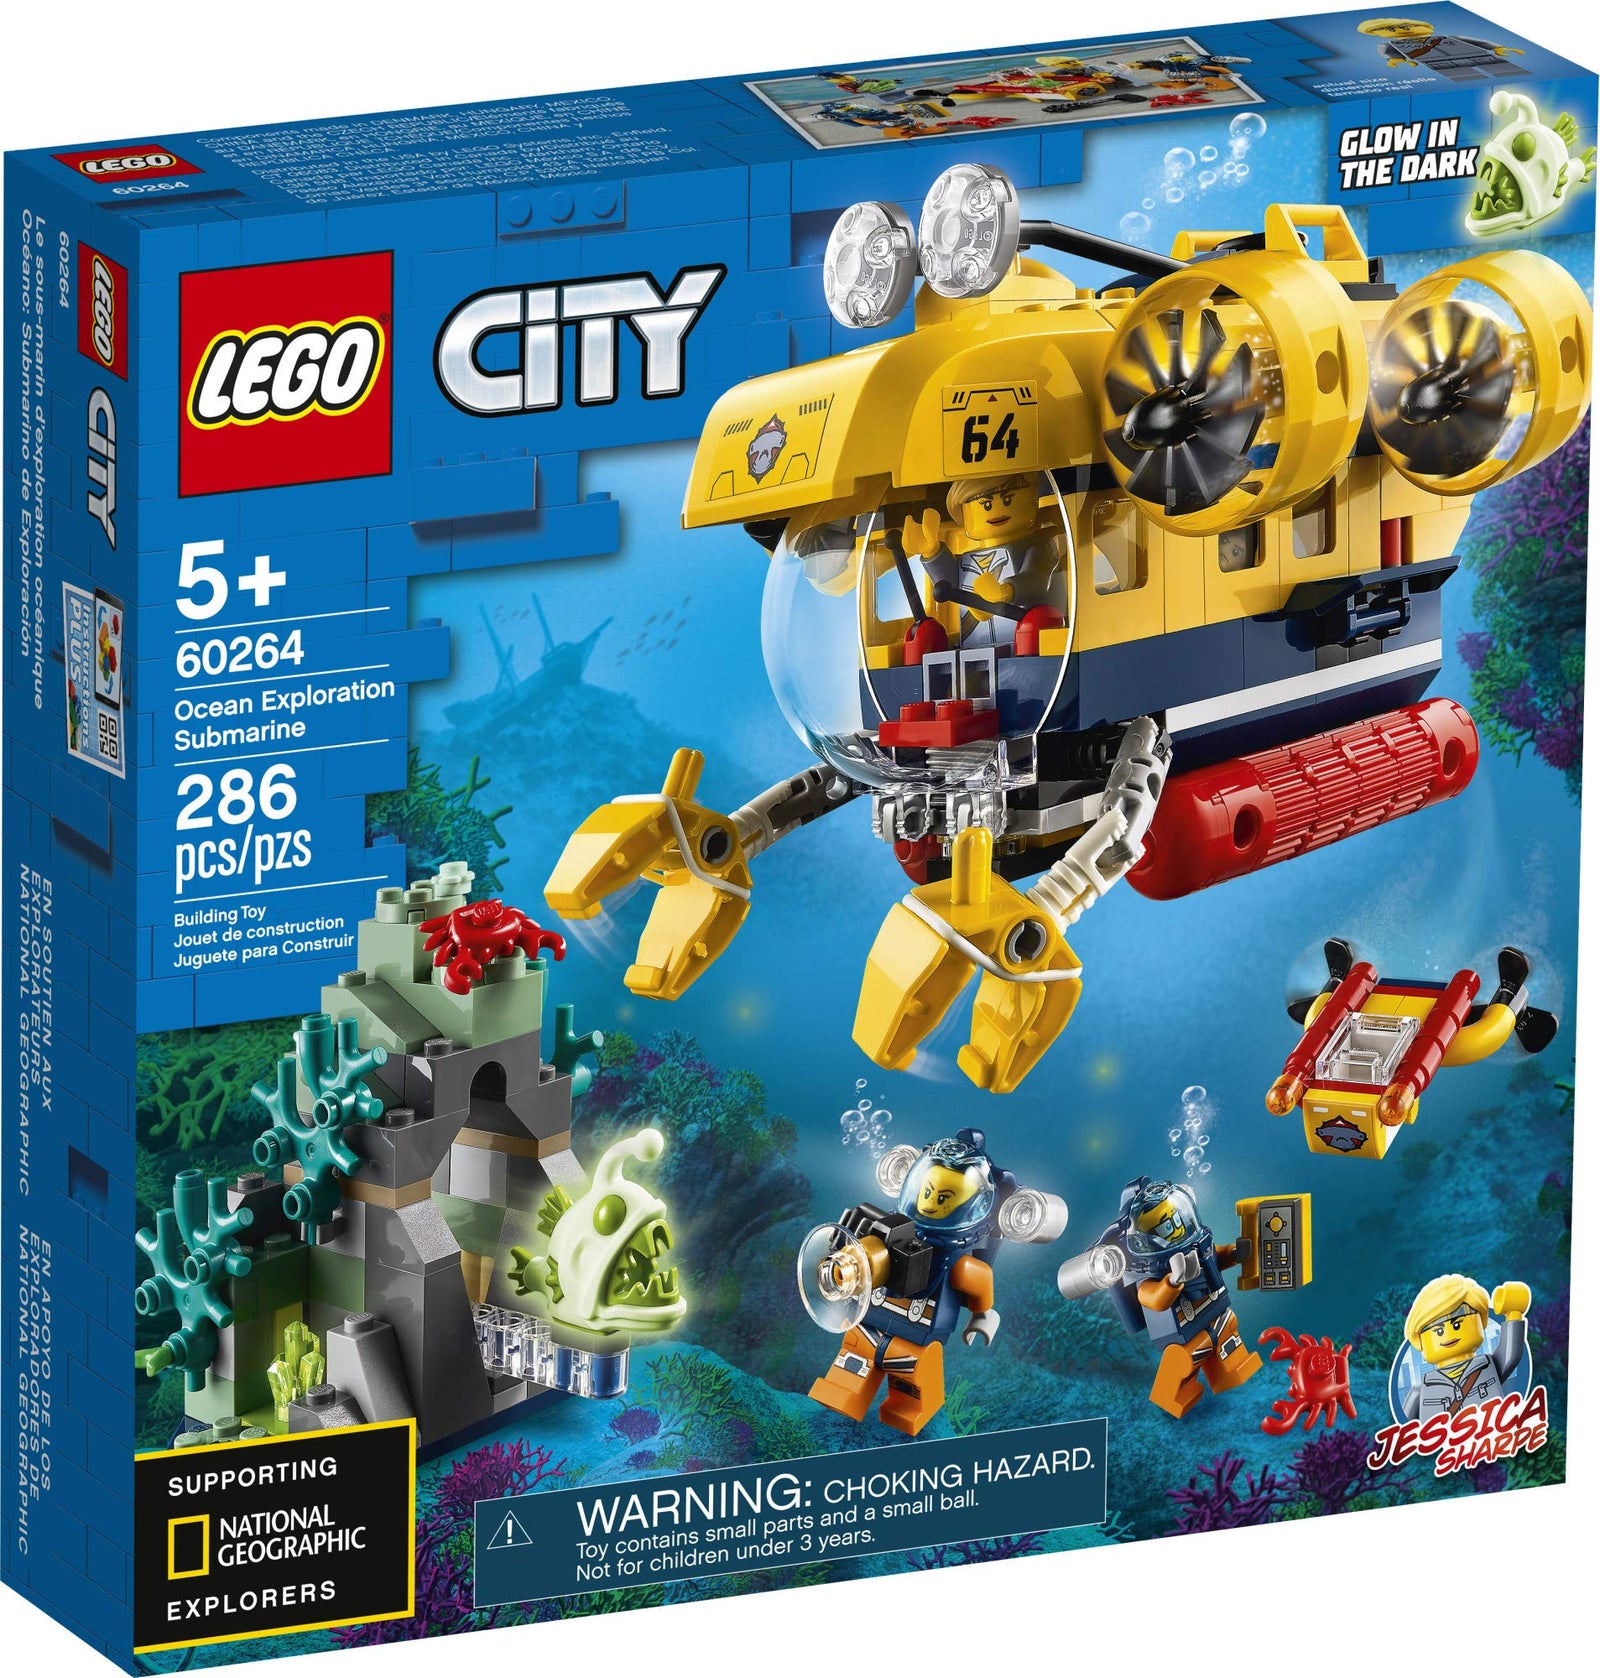 LEGO City Ocean Exploration Submarine 60264, with Submarine, Coral Reef Setting, Underwater Drone, Glow in The Dark Anglerfish Figure and 4 Explorer Minifigures (286 Pieces)